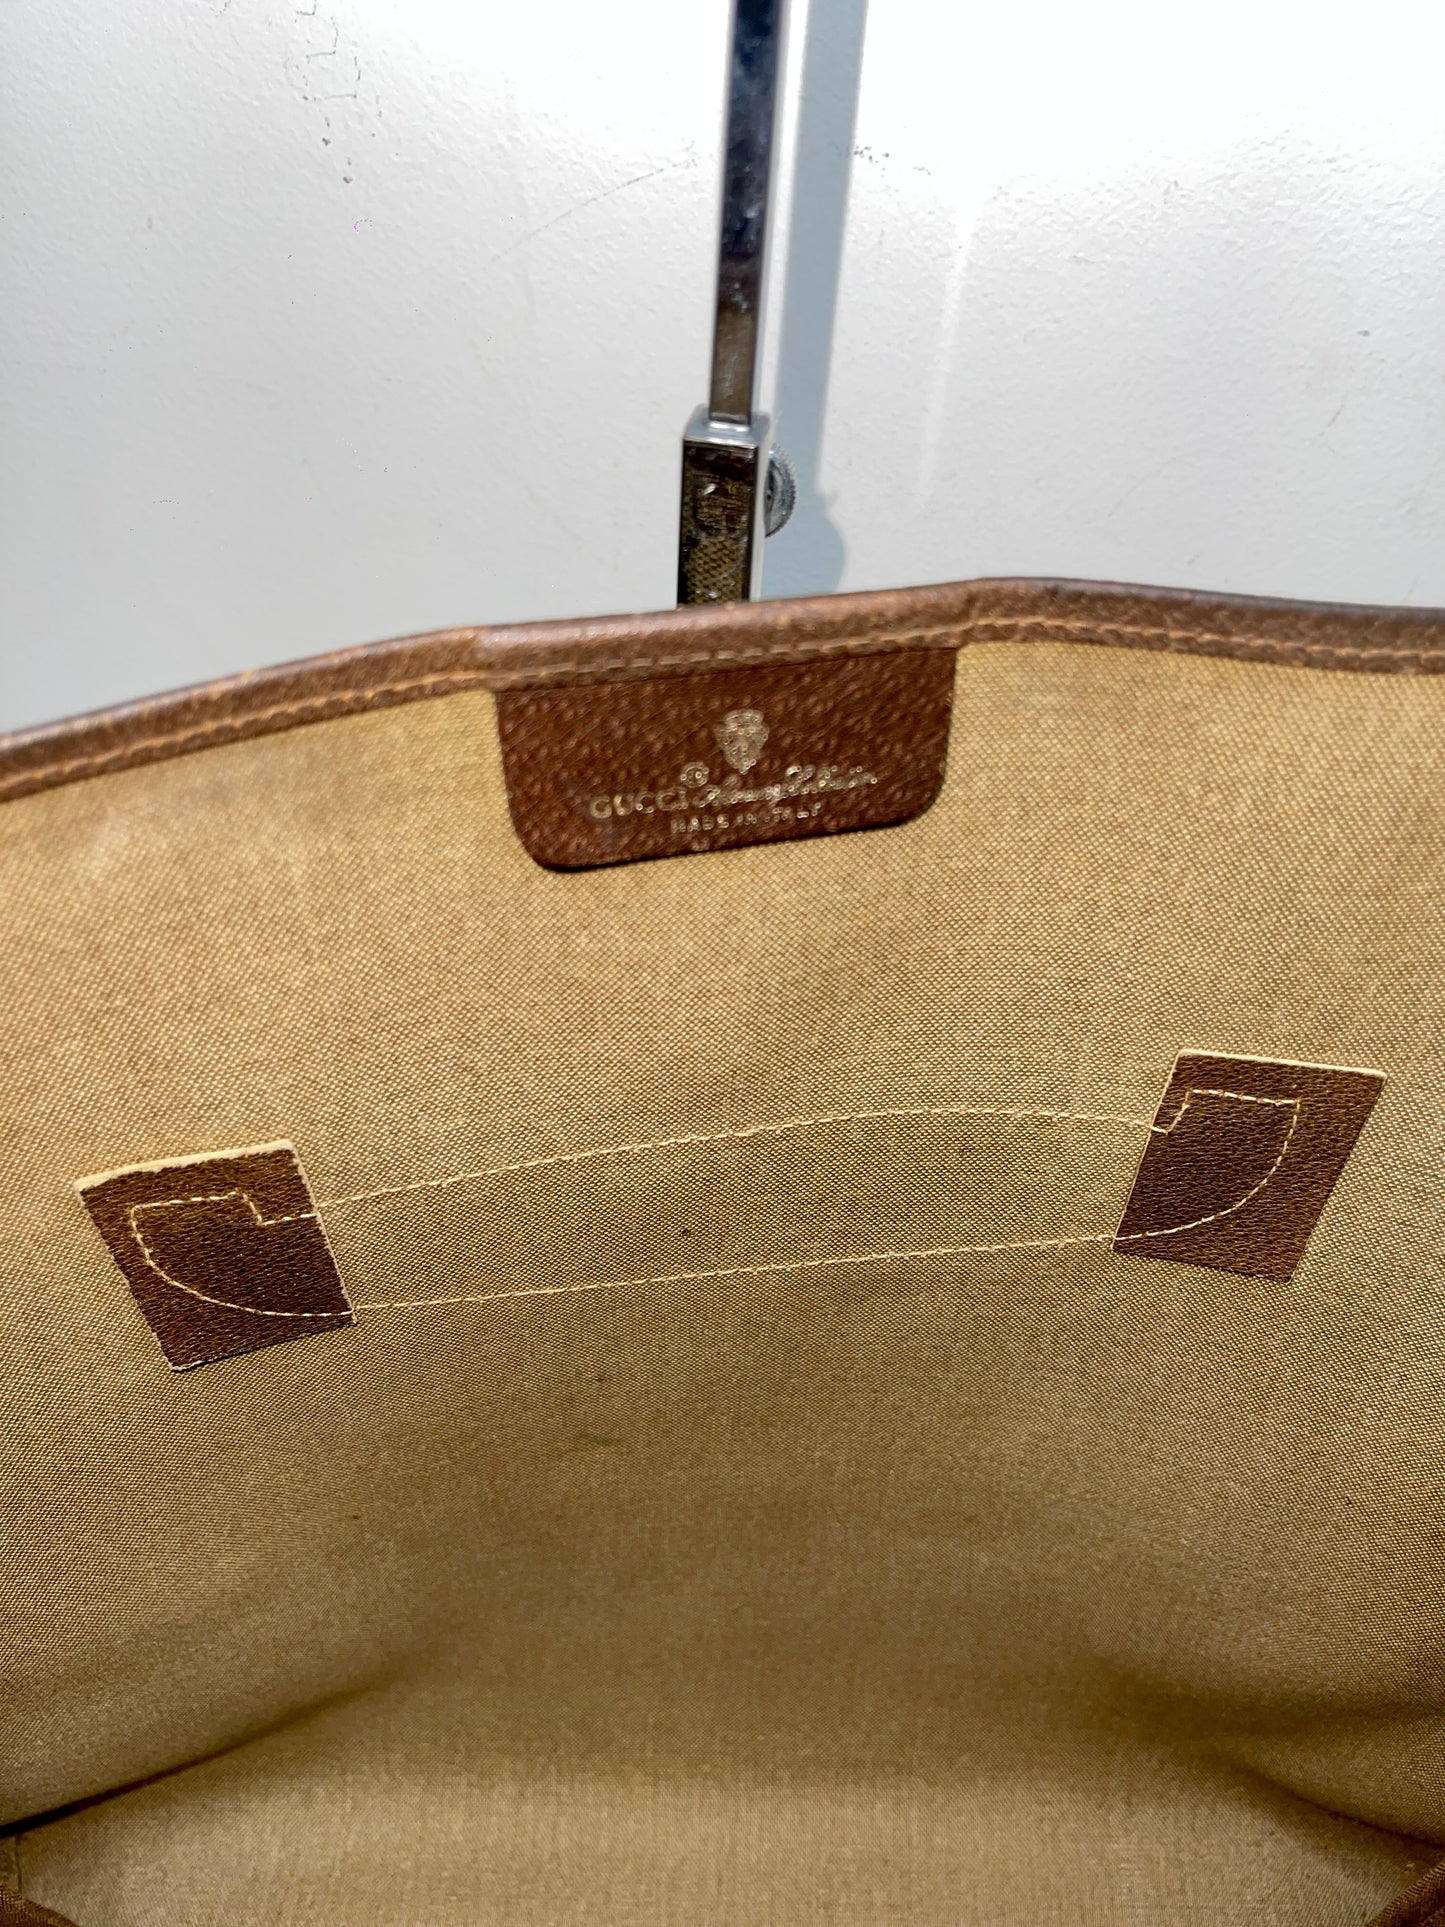 Authentic Gucci Large Tote